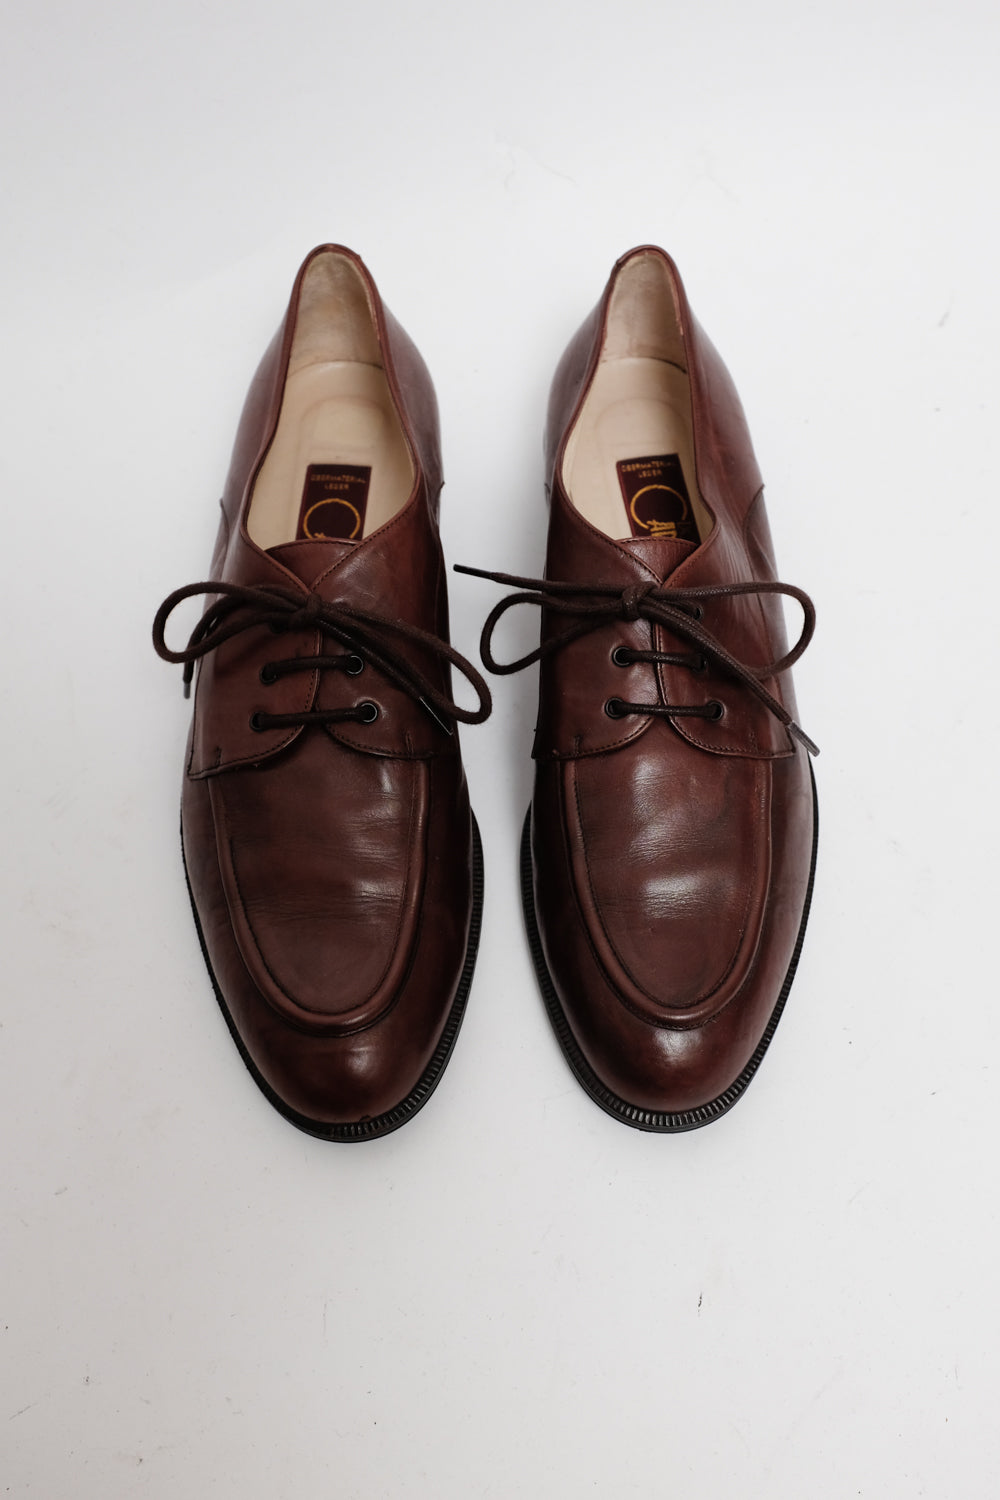 ITALY BROWN LEATHER LACE UP BROGUES 39,5